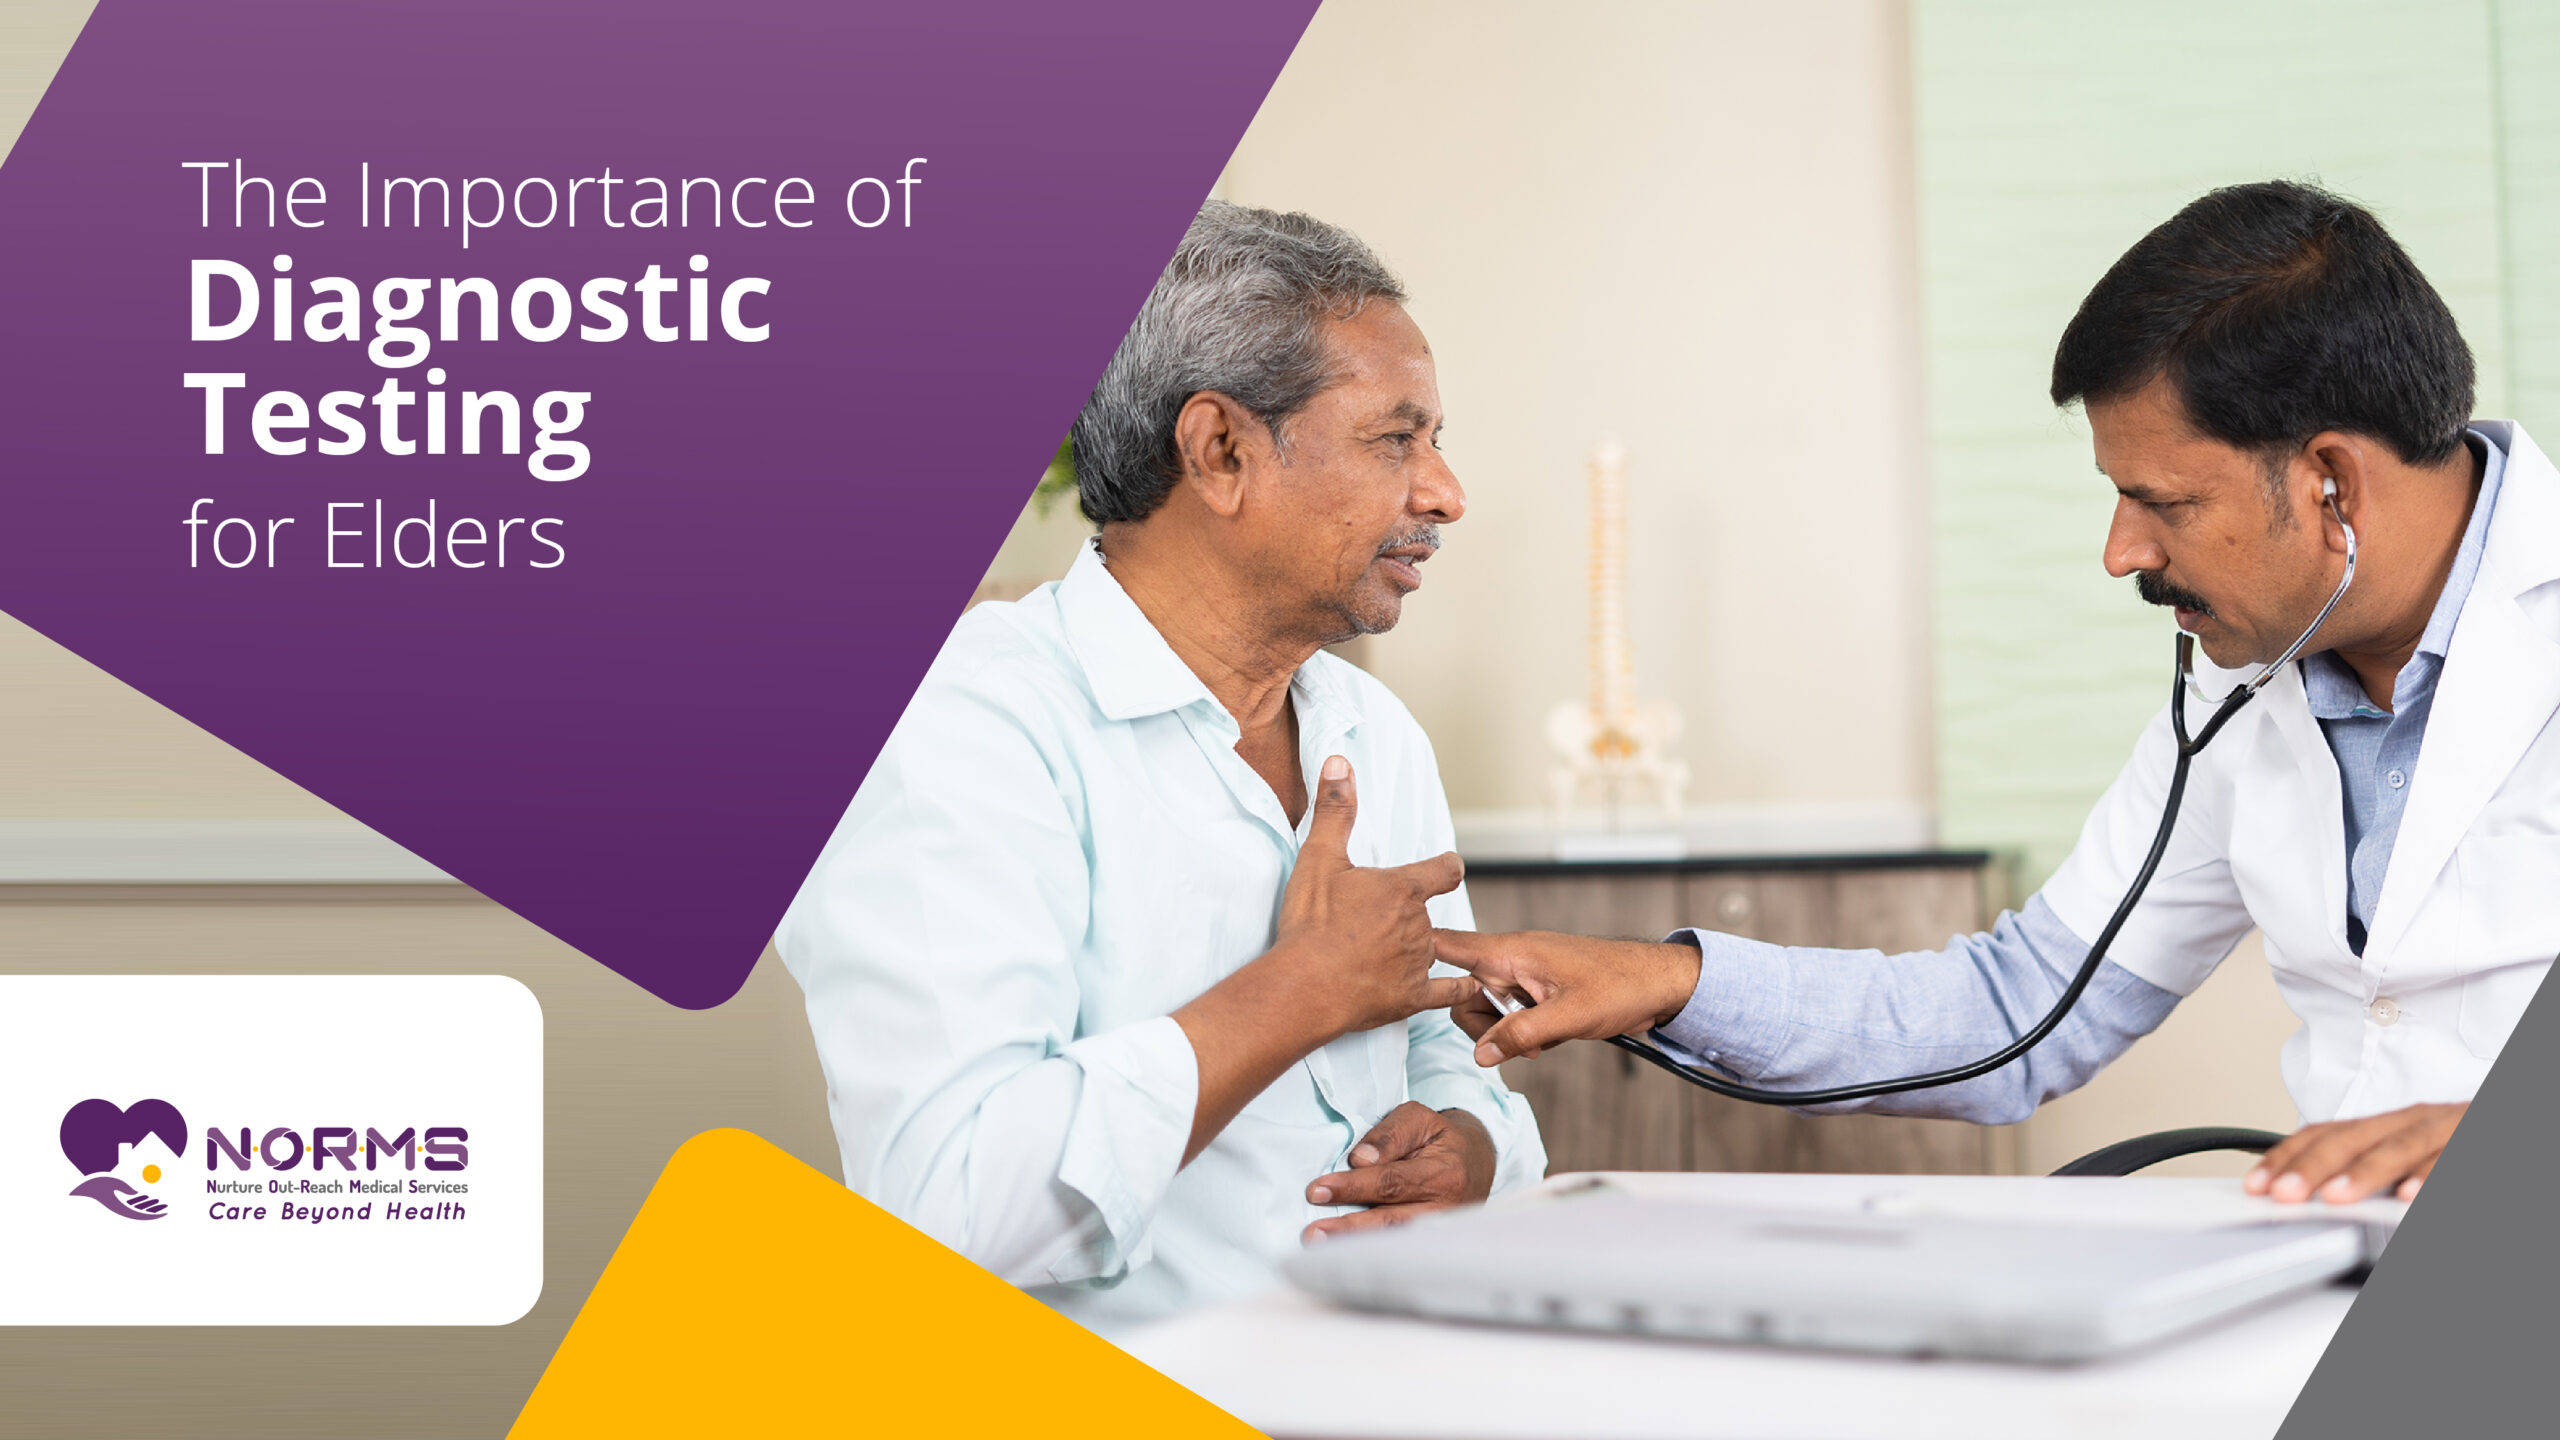 The Importance of Diagnostic Testing for Elders